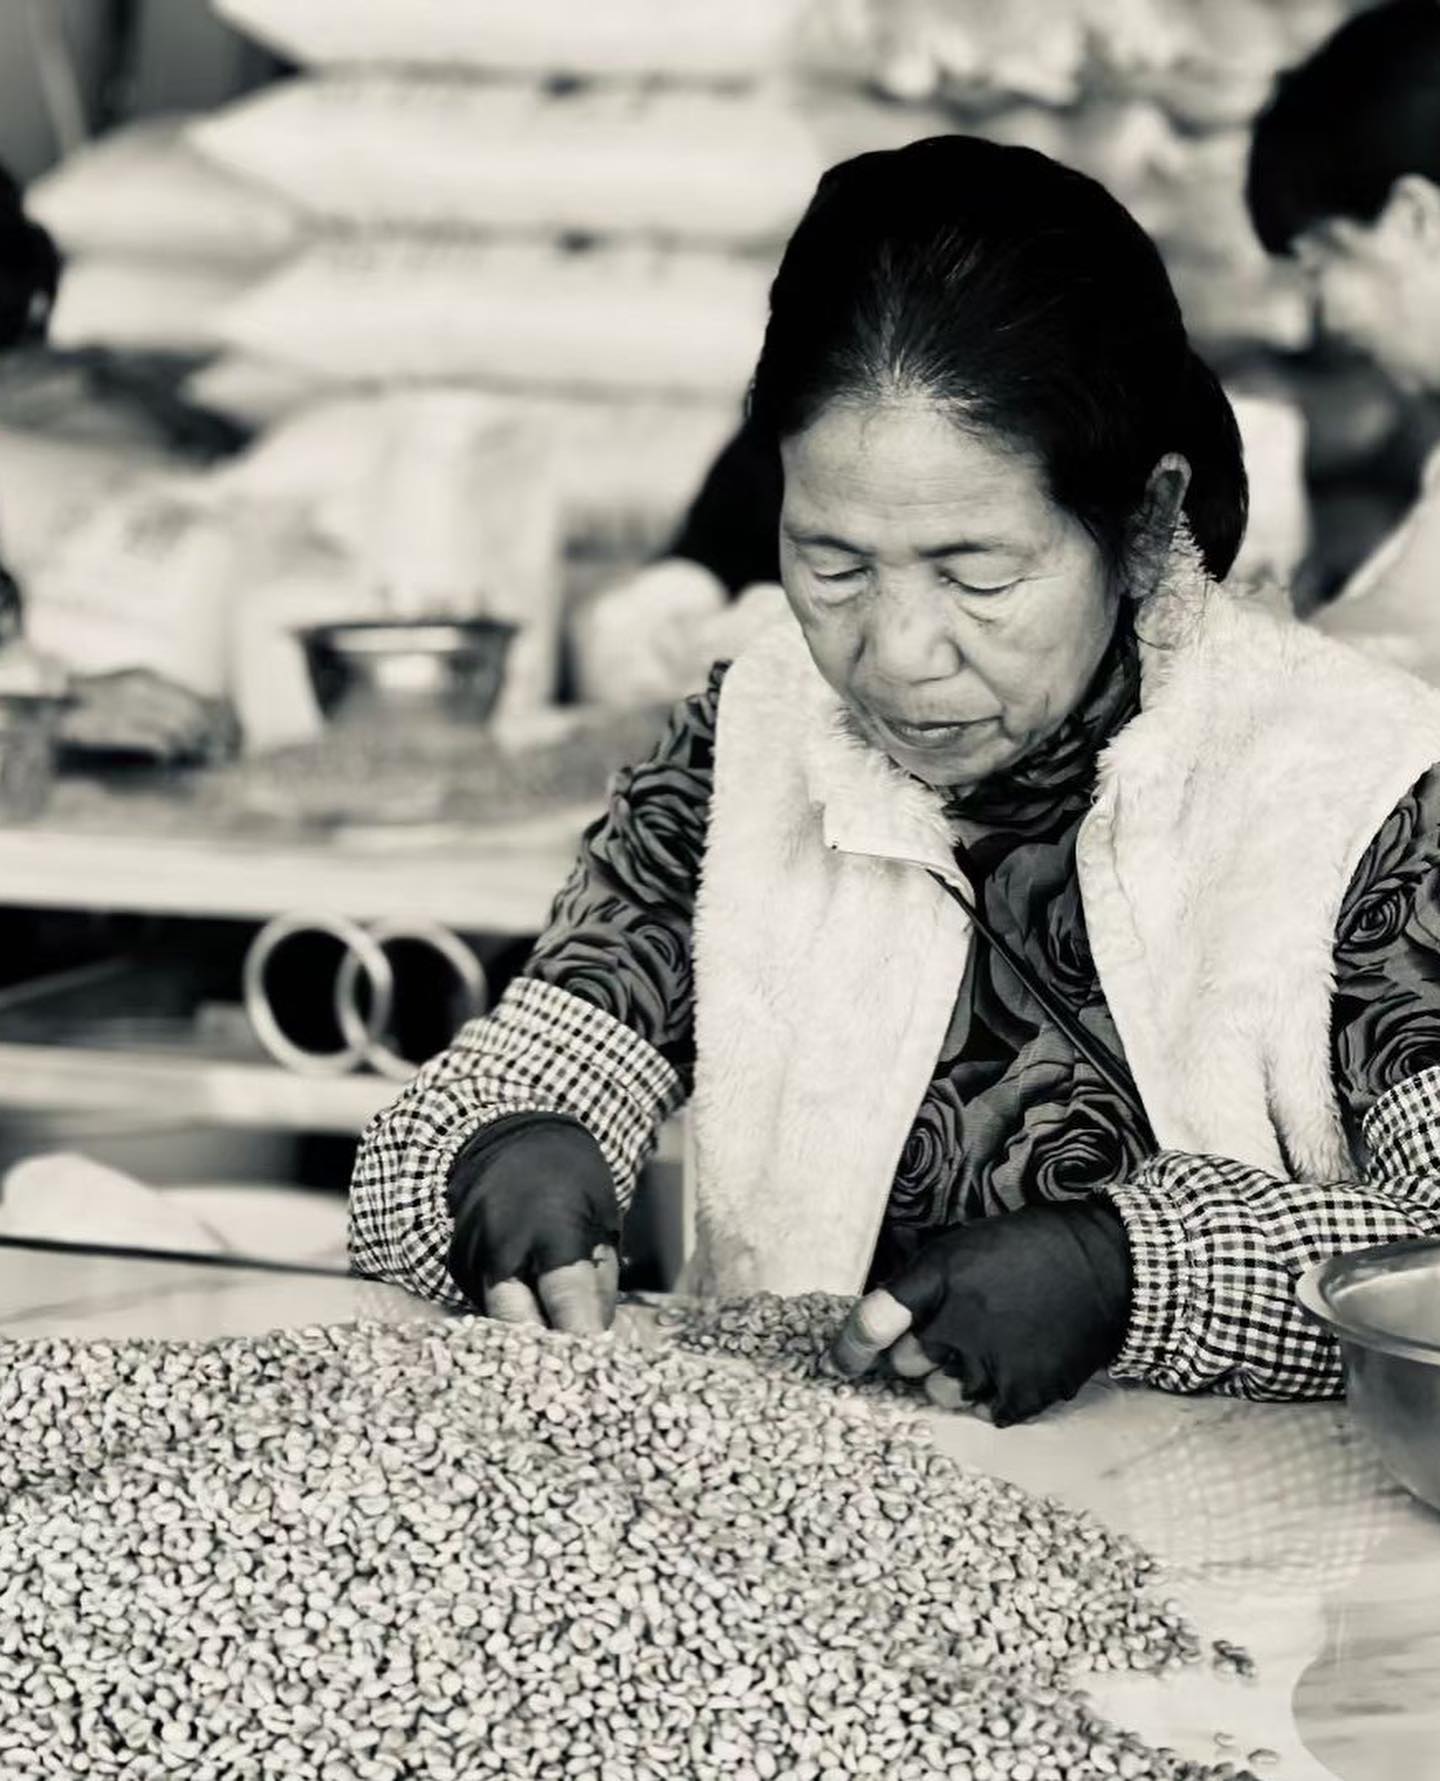 Do_you_know_where_your_coffee_comes_from_Through_direct-sourcing_beans_from_these_villages_our_team_can_ensure_there_is_.jpg